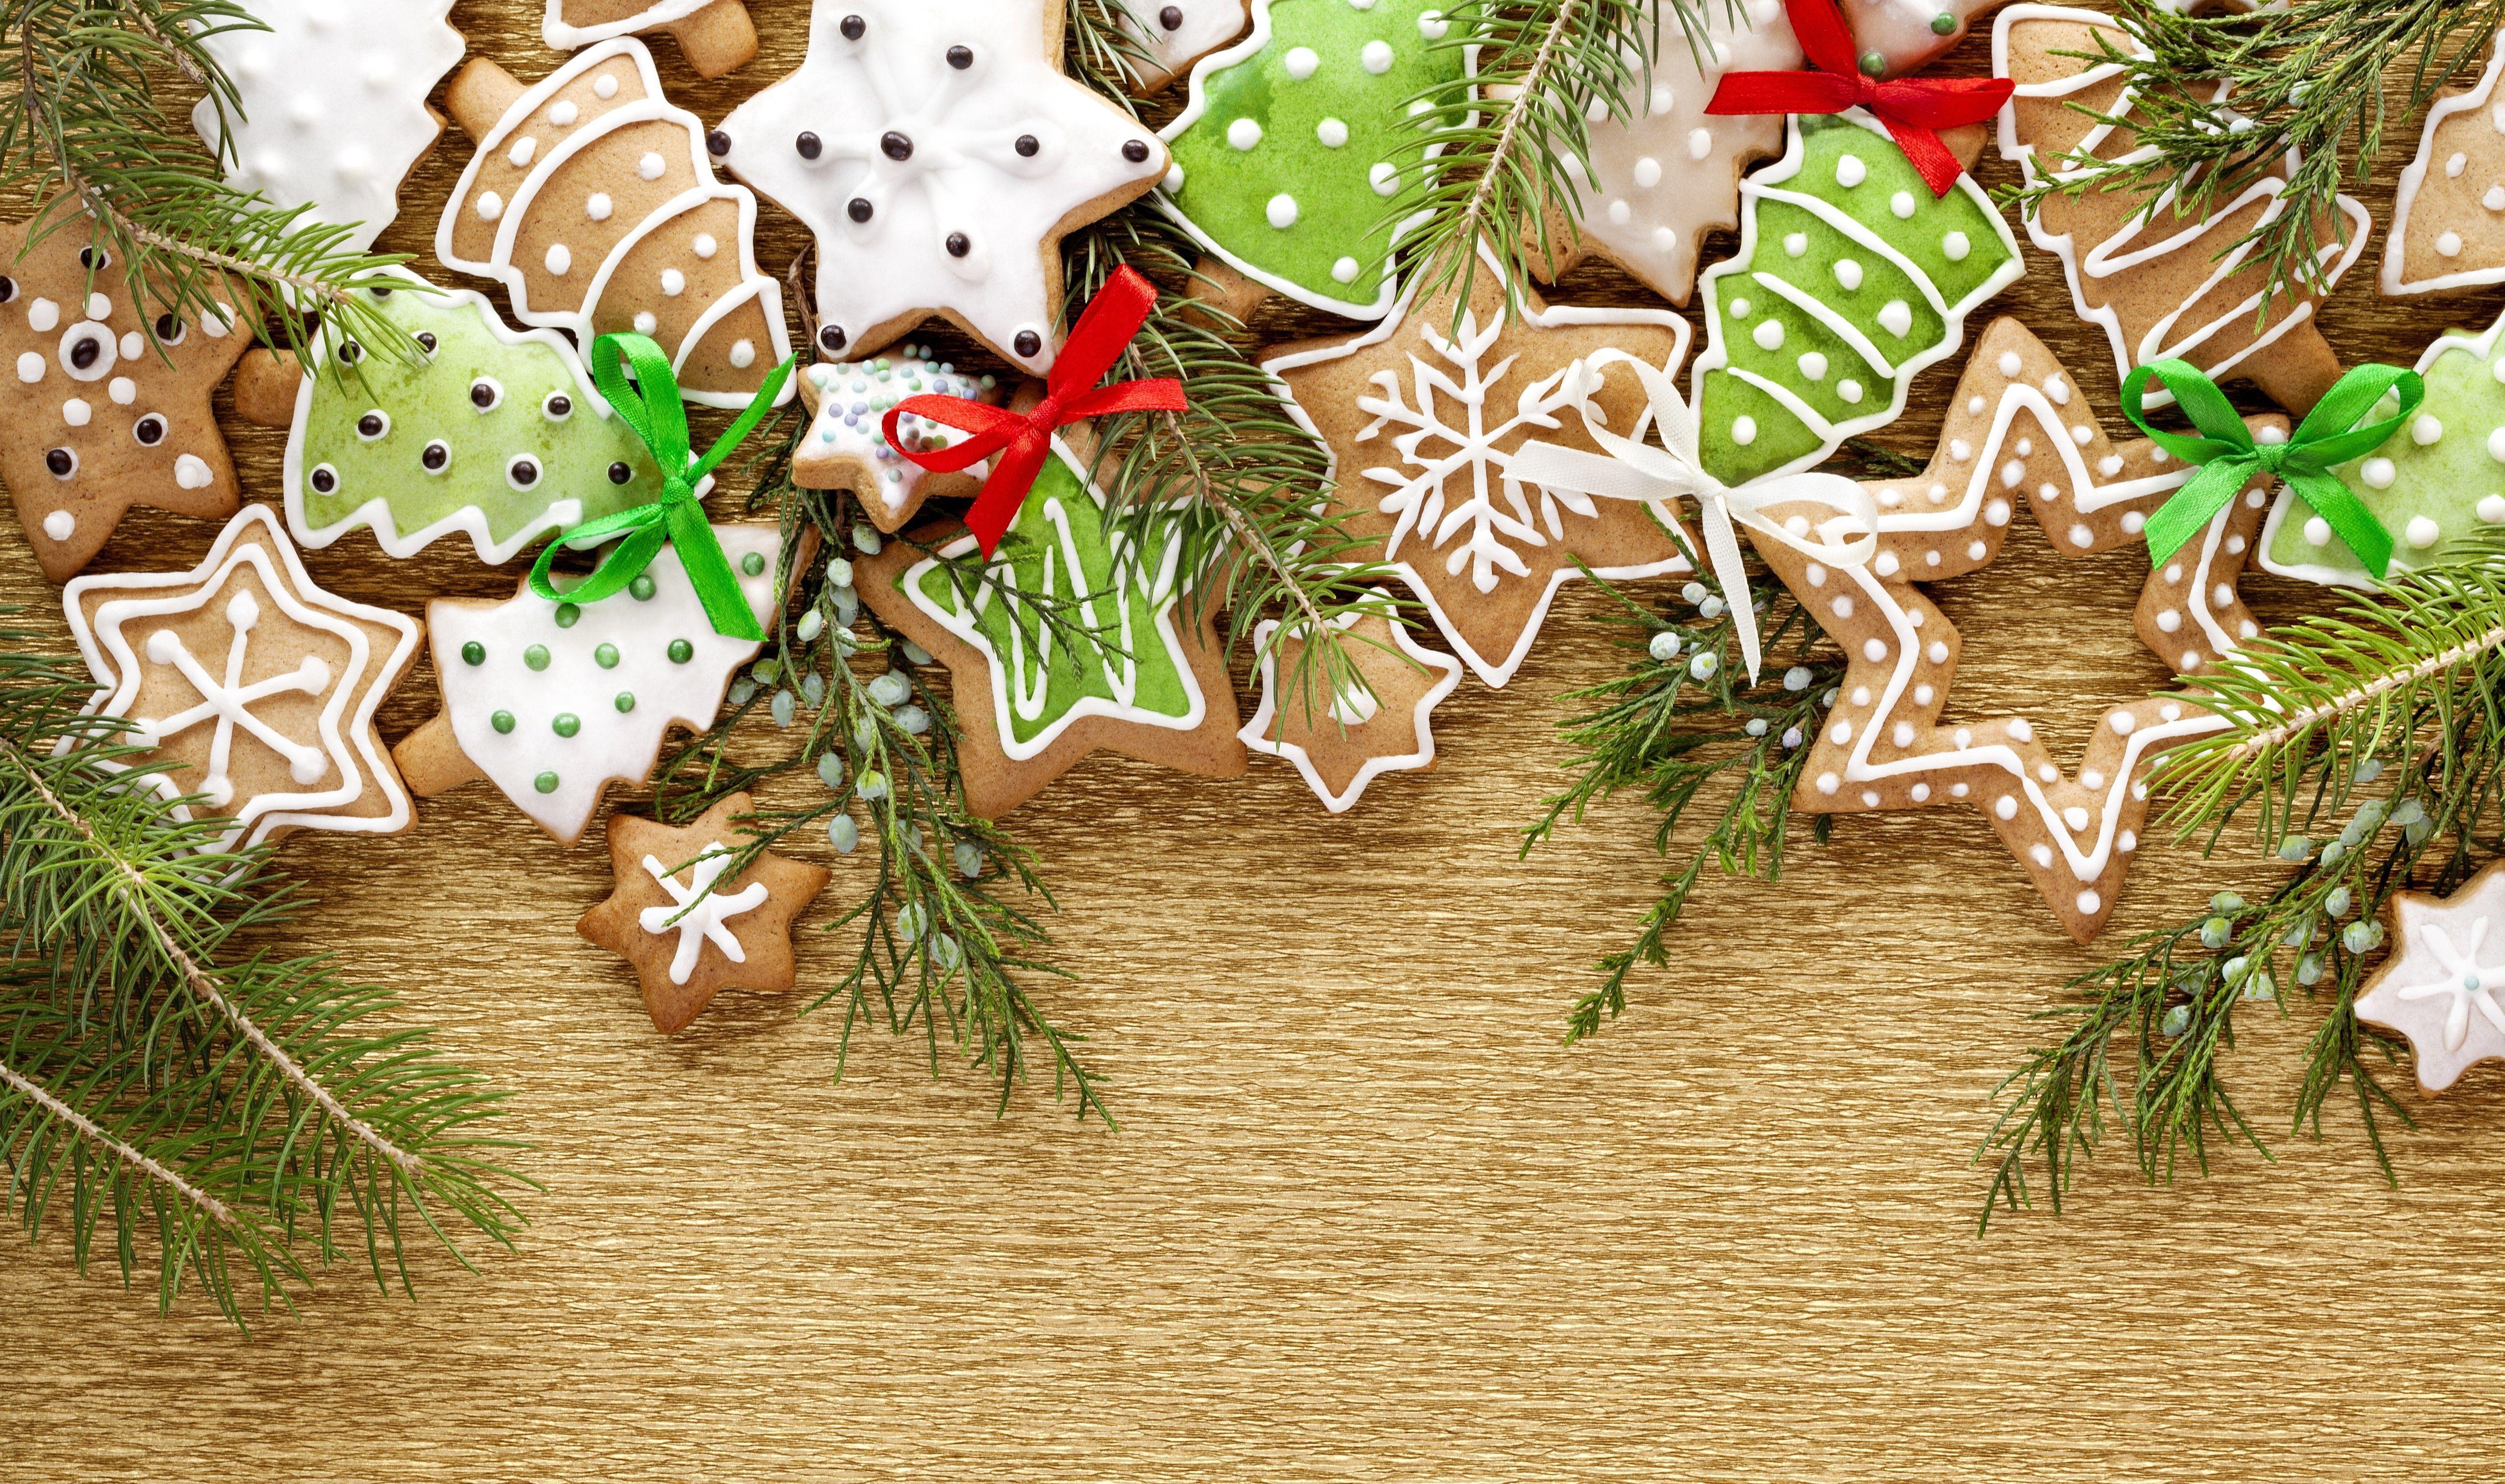 Christmas tree, biscuit wallpaper and image, picture